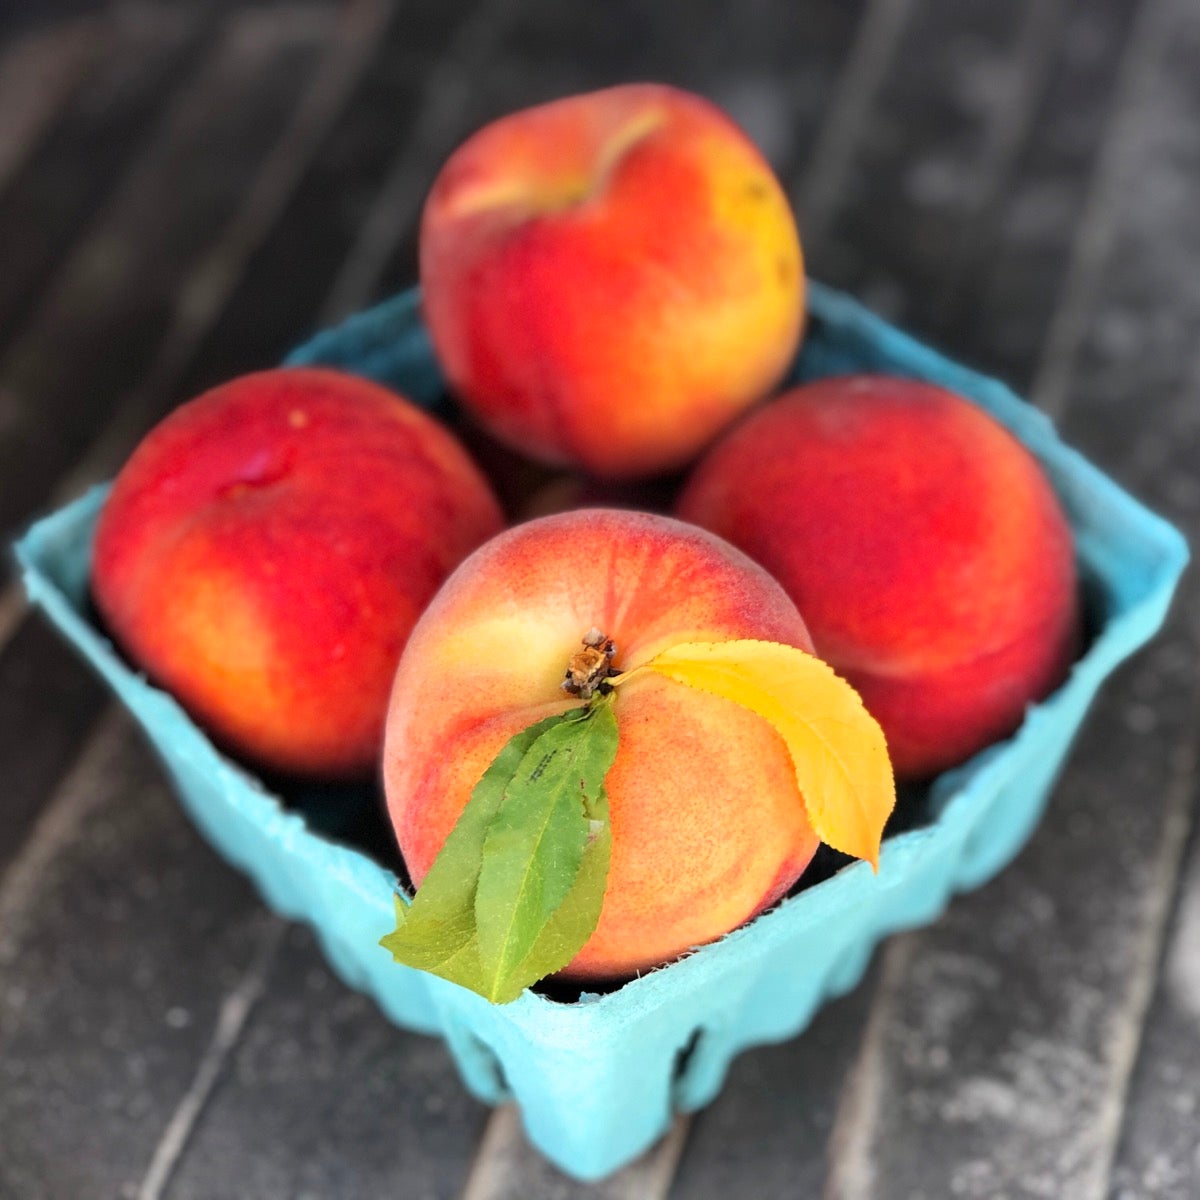 A quart container of beautiful fresh peaches, one with the leaves intact.